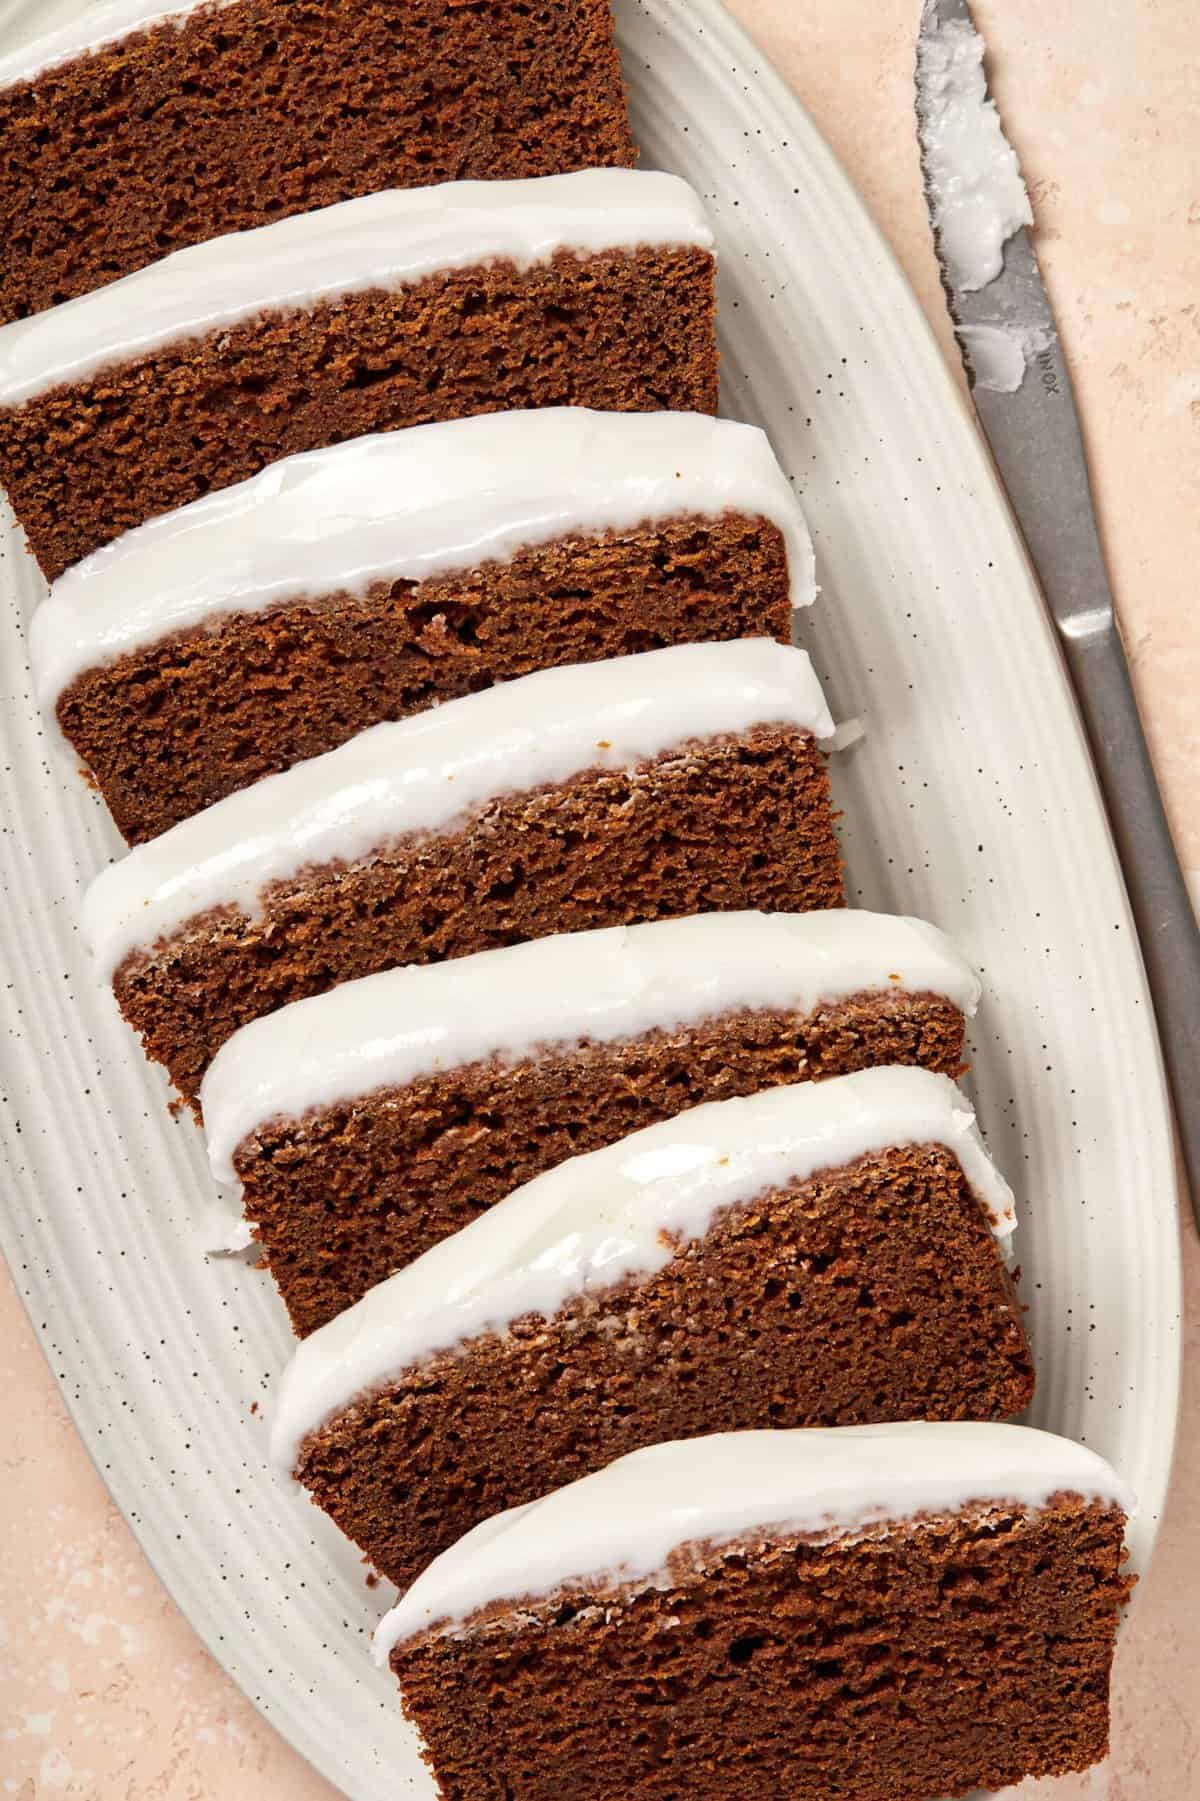 Slices of gingerbread loaf, sitting on a white oval dish with a knife on the side.